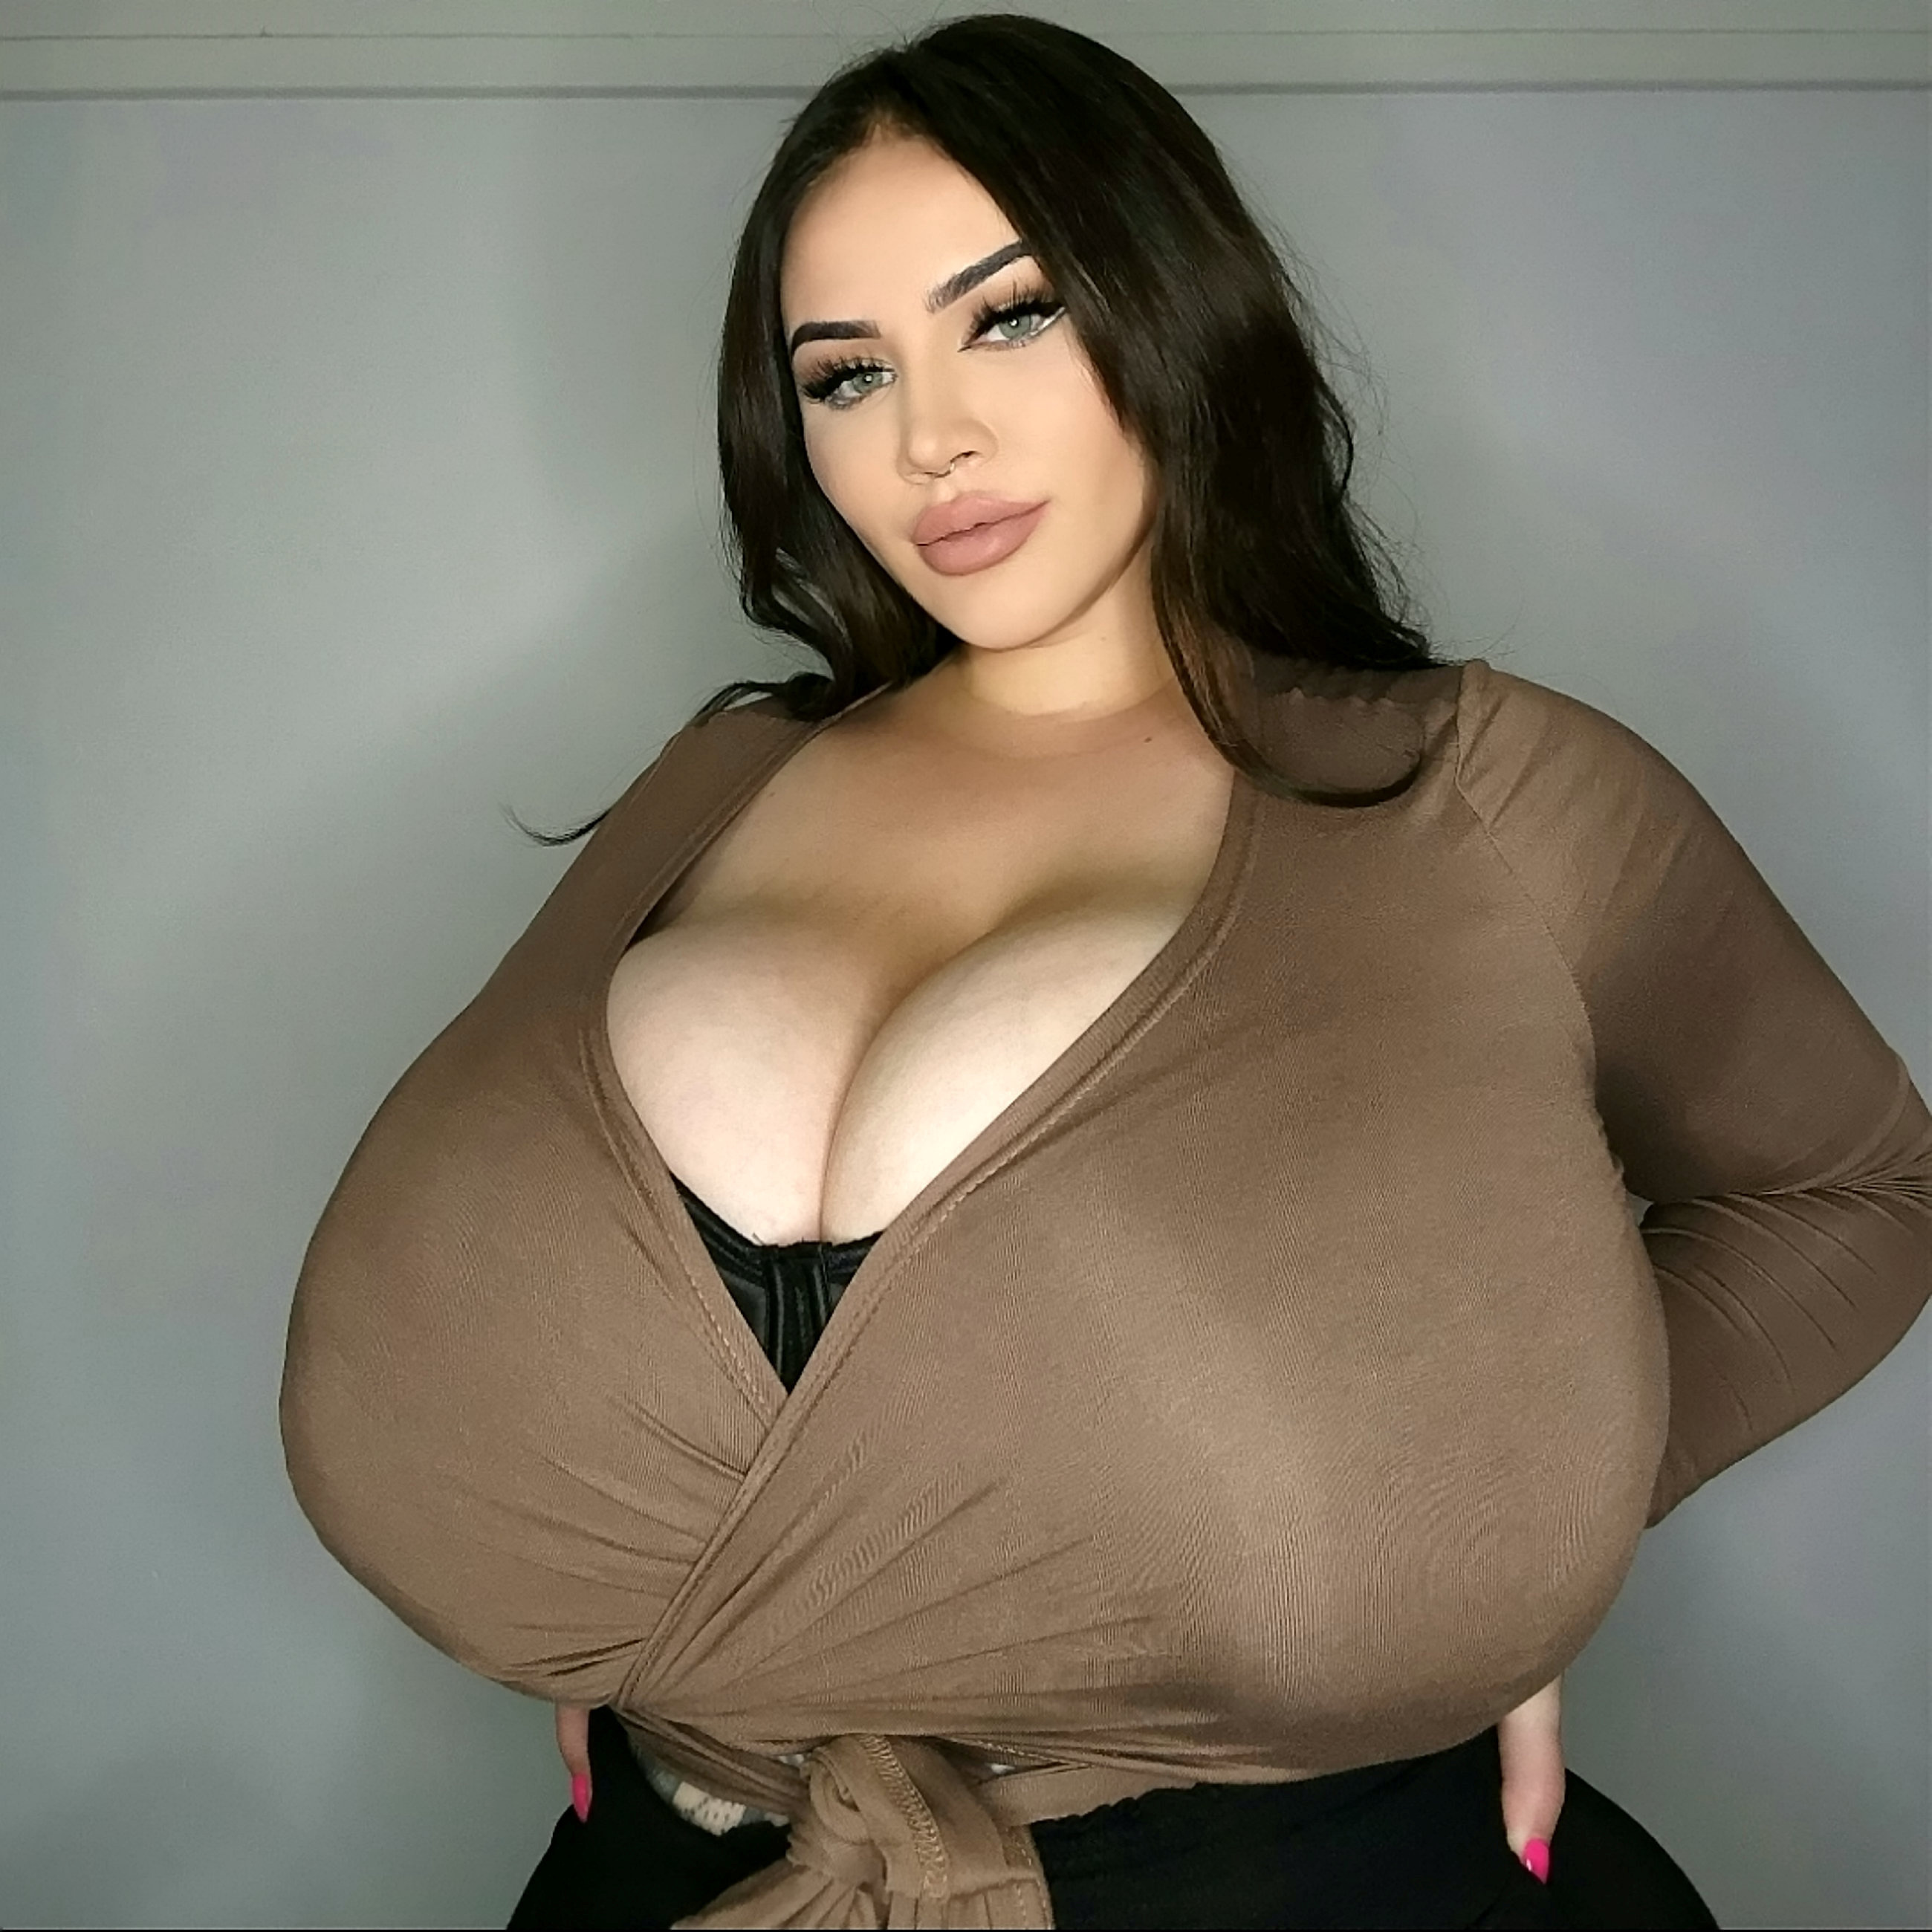 clair gray recommends show me images of boobs pic